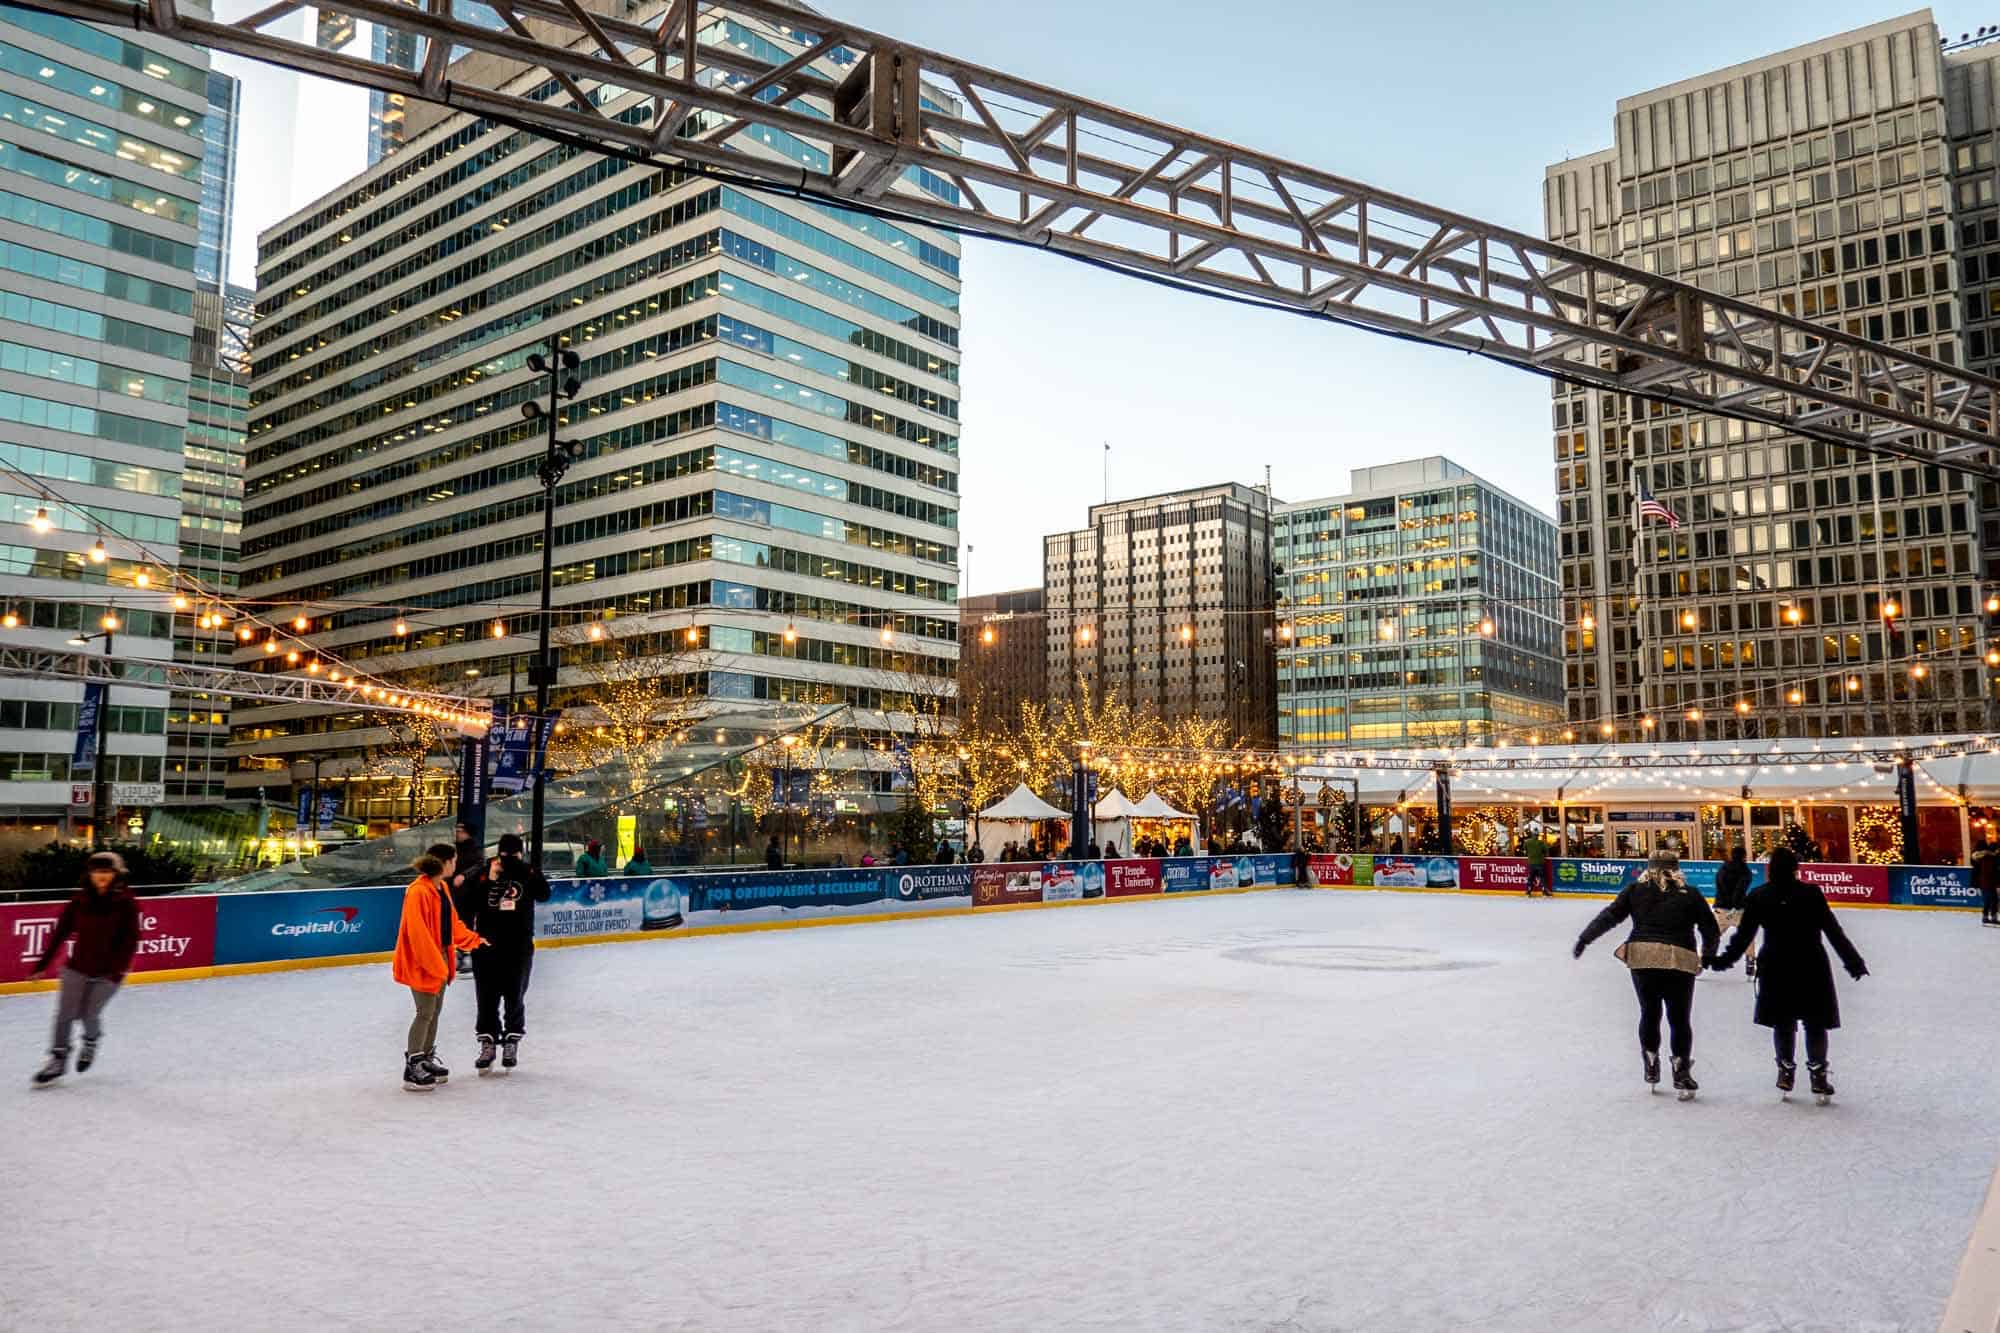 People skating on an ice-skating rink surrounded by high-rise buildings